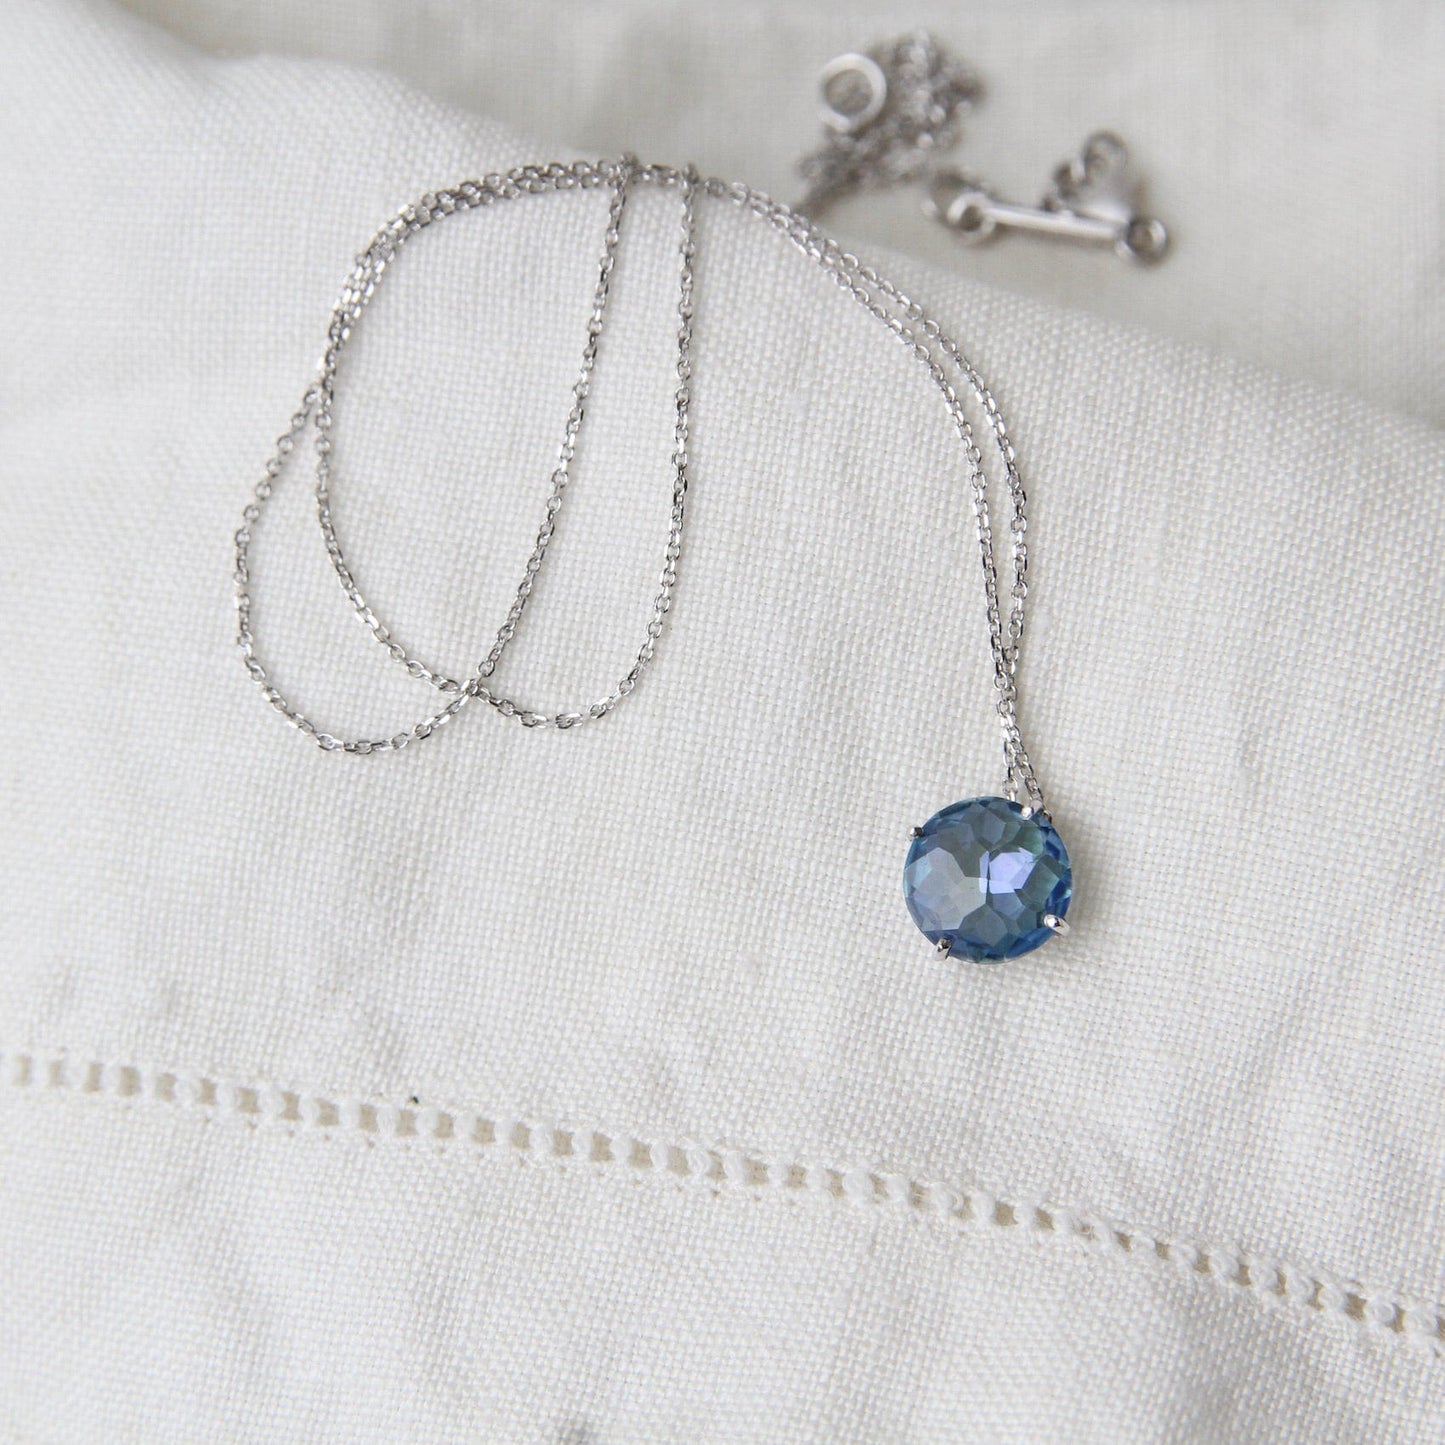 Load image into Gallery viewer, NKL-14K 14k White Gold 8mm Round English Blue Topaz Necklace
